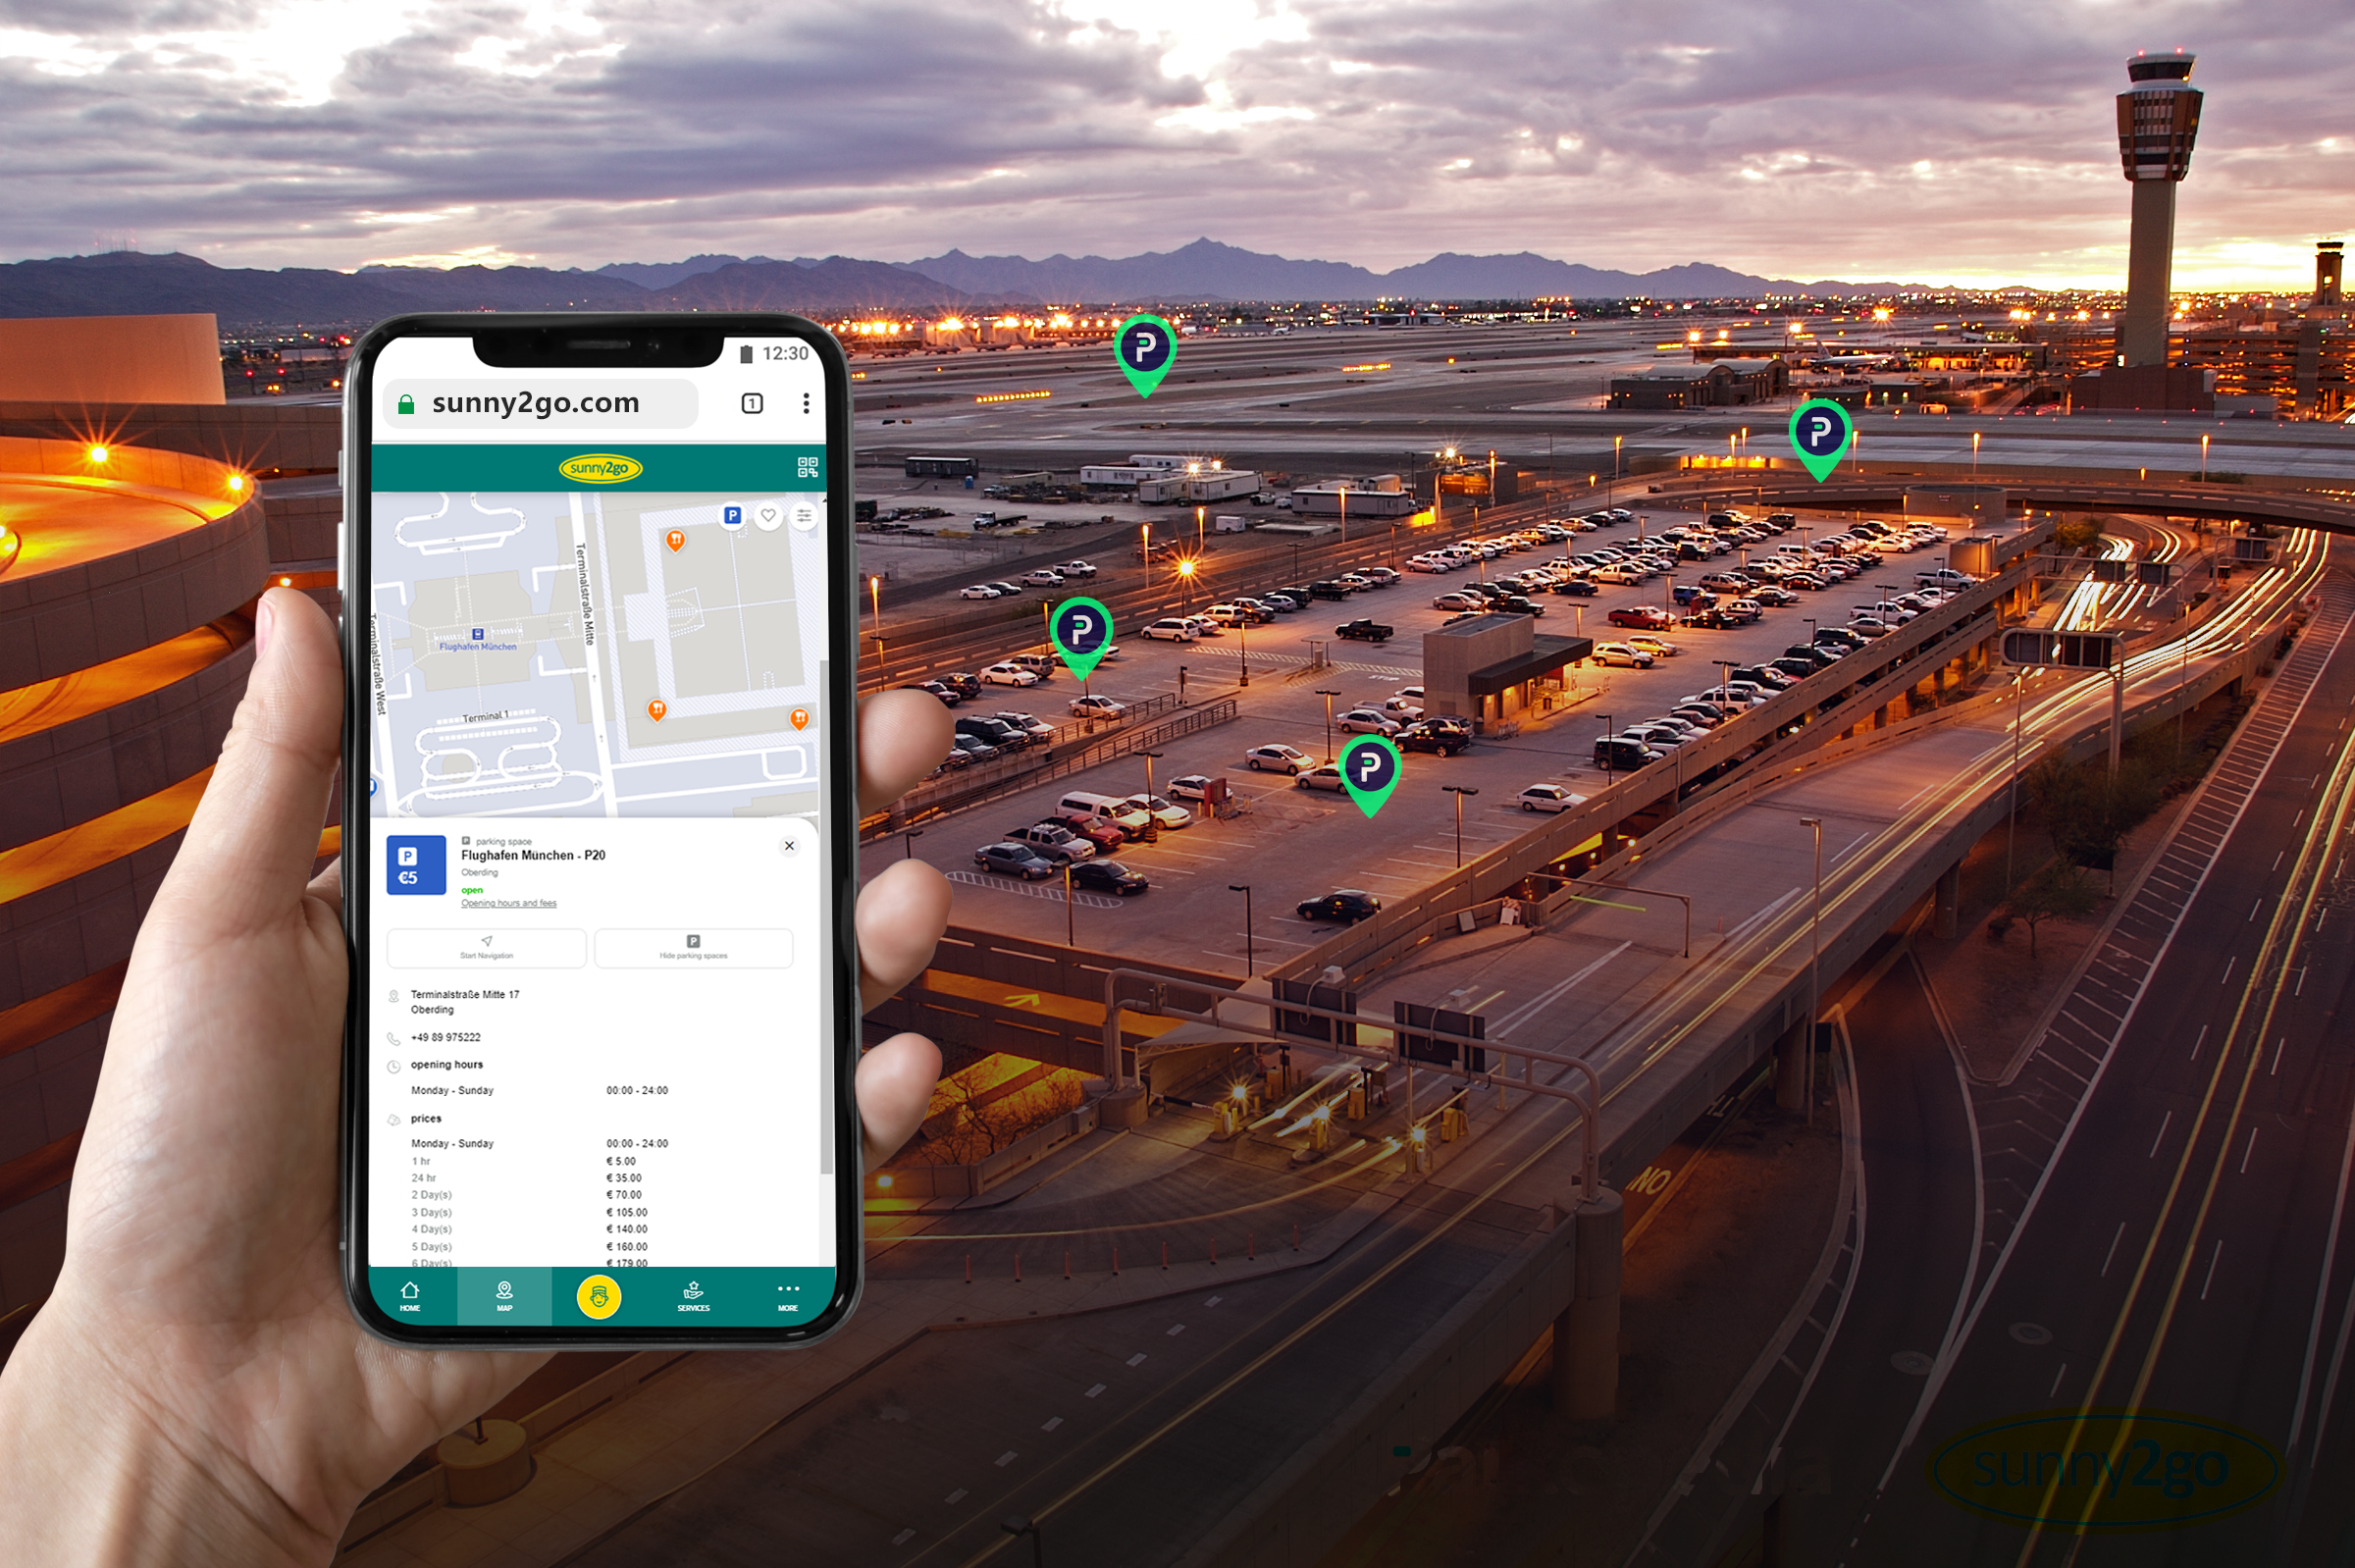 As the global leader in digital parking services , Parkopedia continues to expand its supported industries across mobility, transportation and logistic service provider